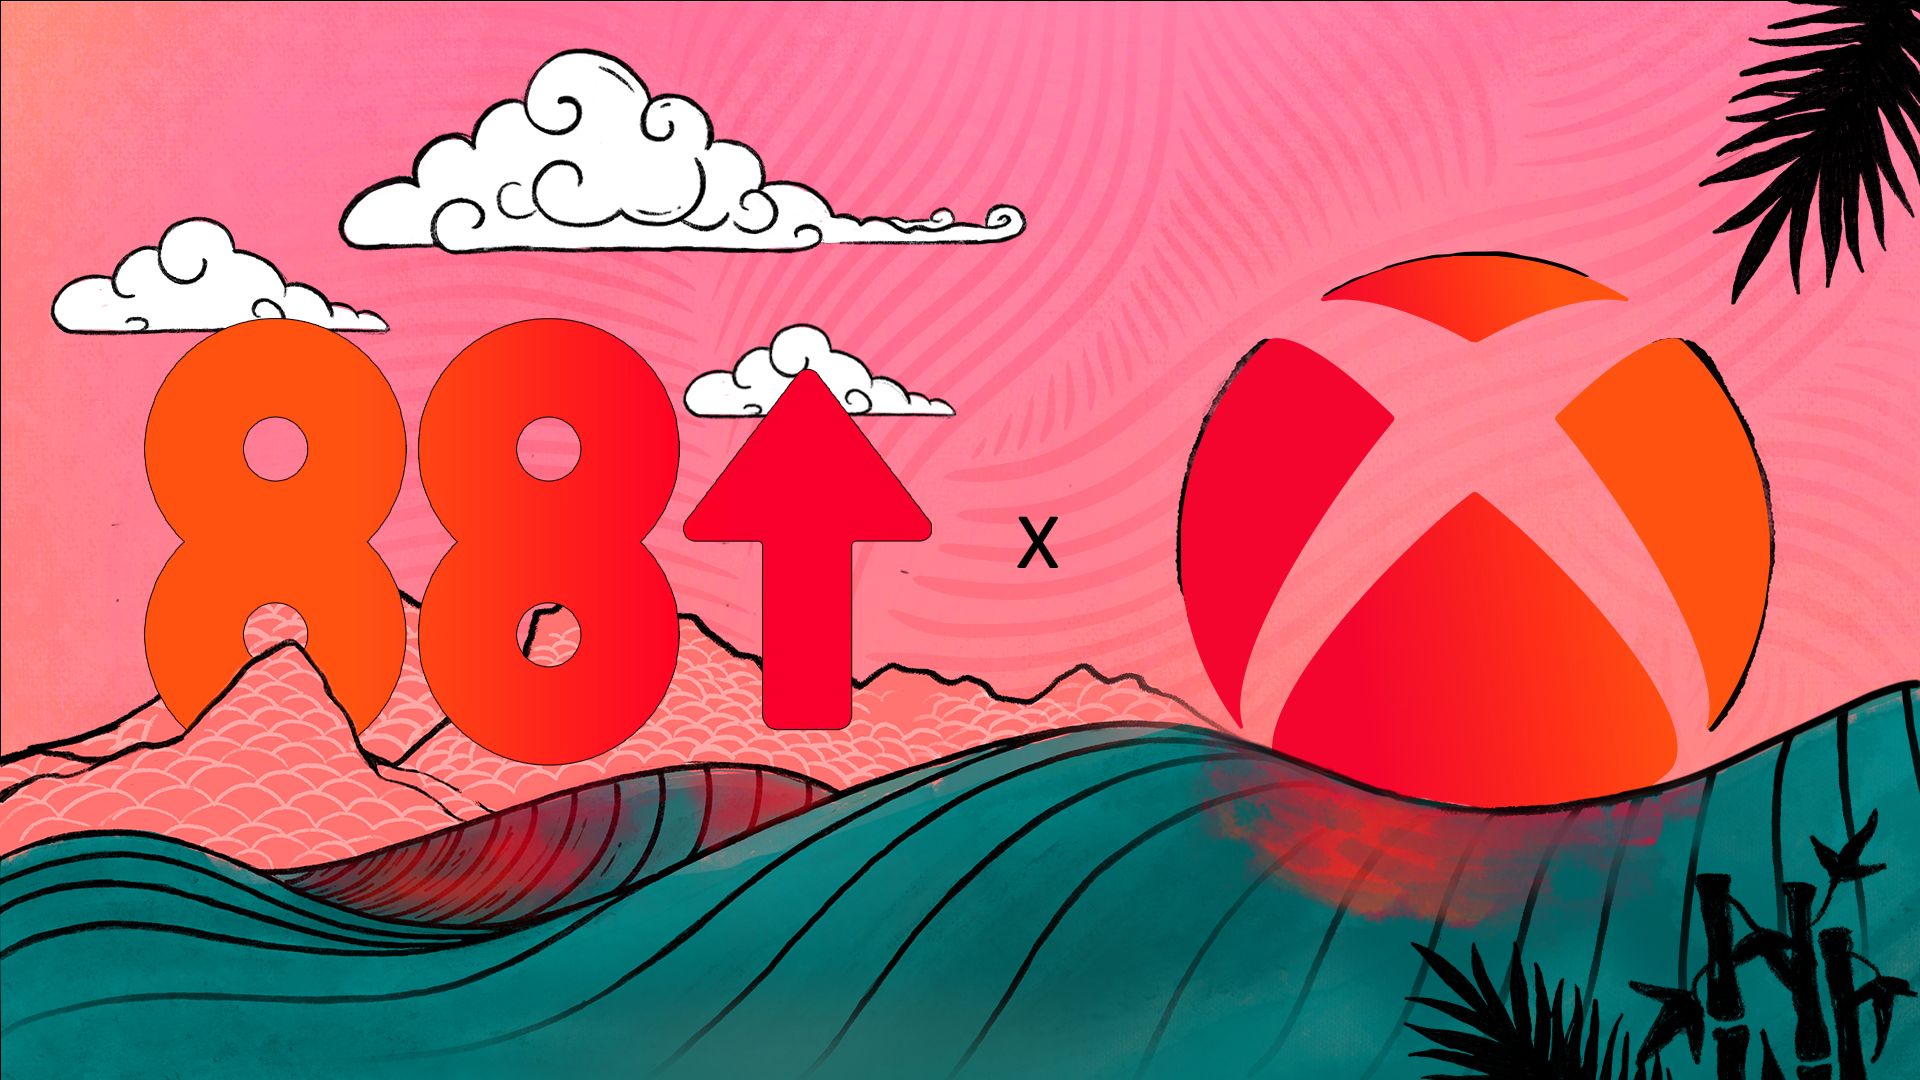 Xbox and 88rising: Music, Games, and Shared Experiences